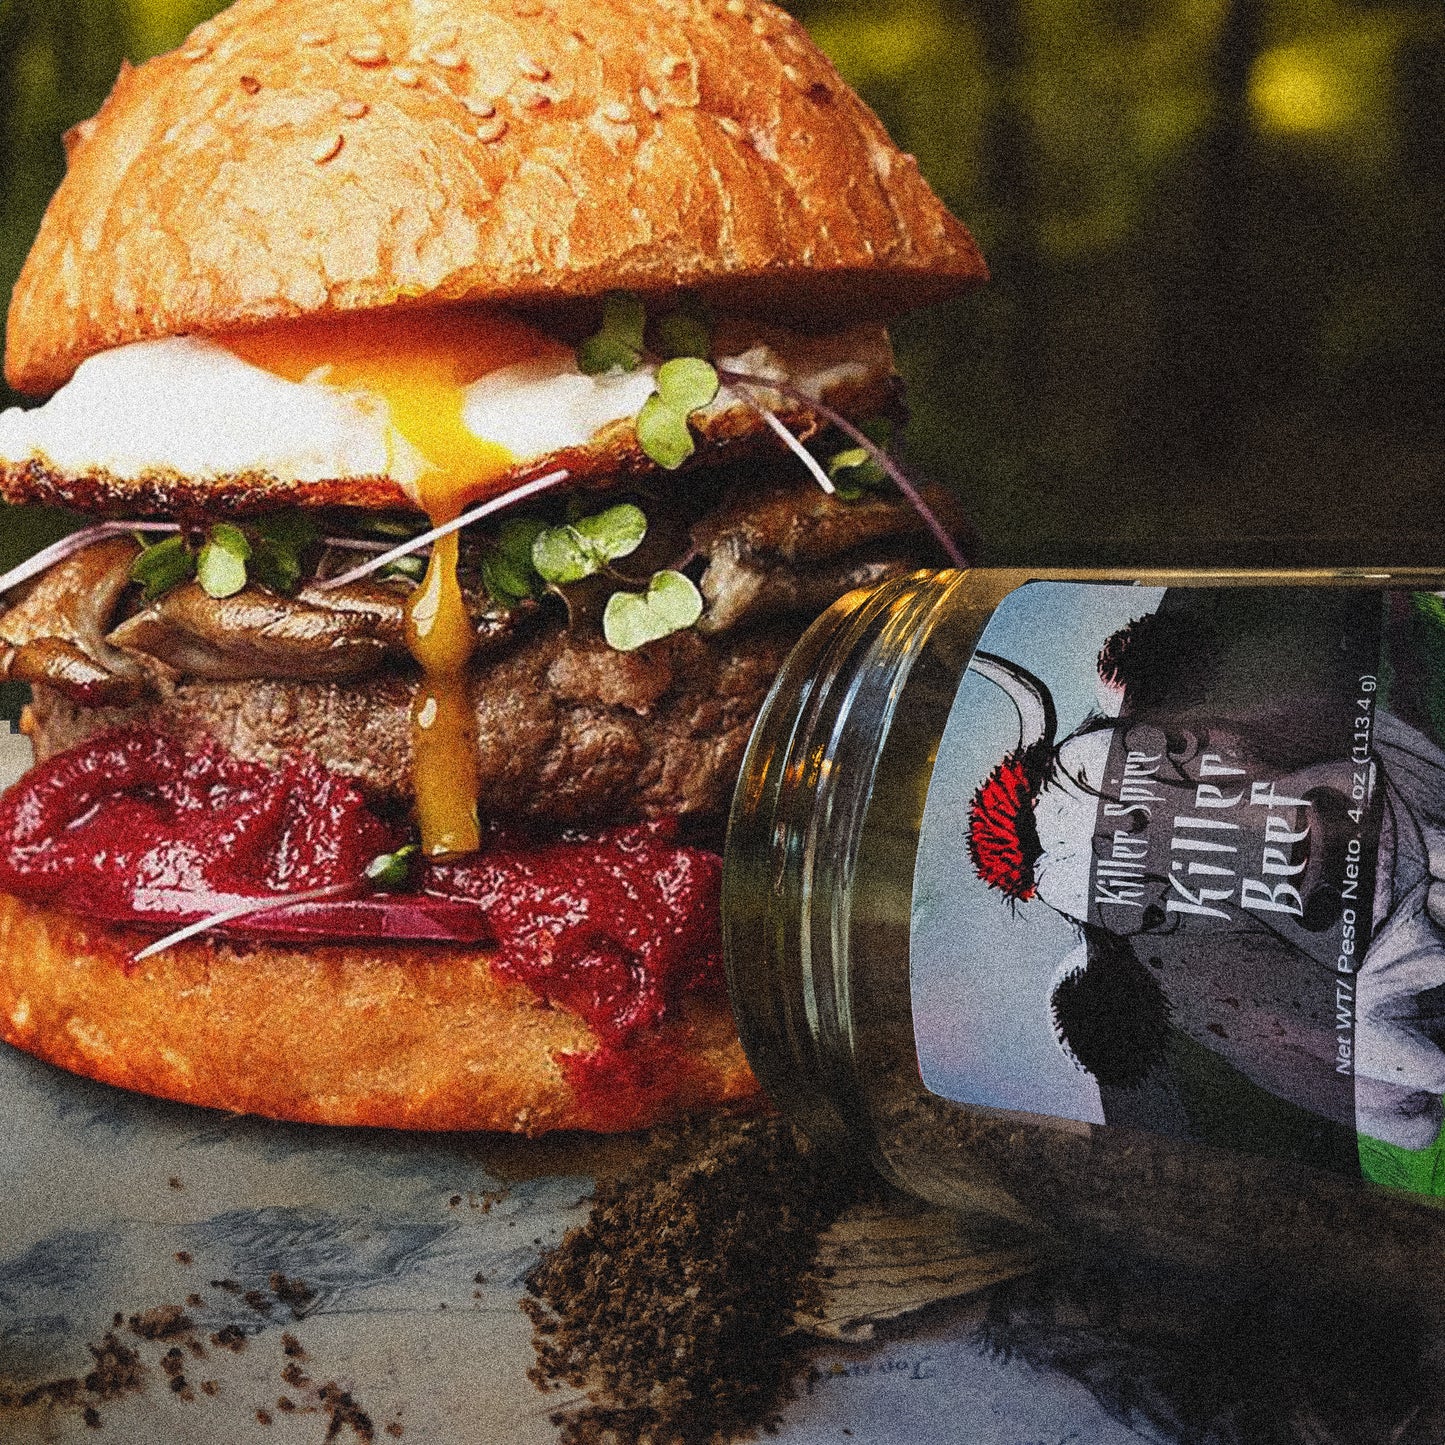 A gourmet burger with a runny egg and microgreens, seasoned with Killer Spice's Killer Beef blend, beside a jar of coffee grounds, presented in an artistic, rustic setting.